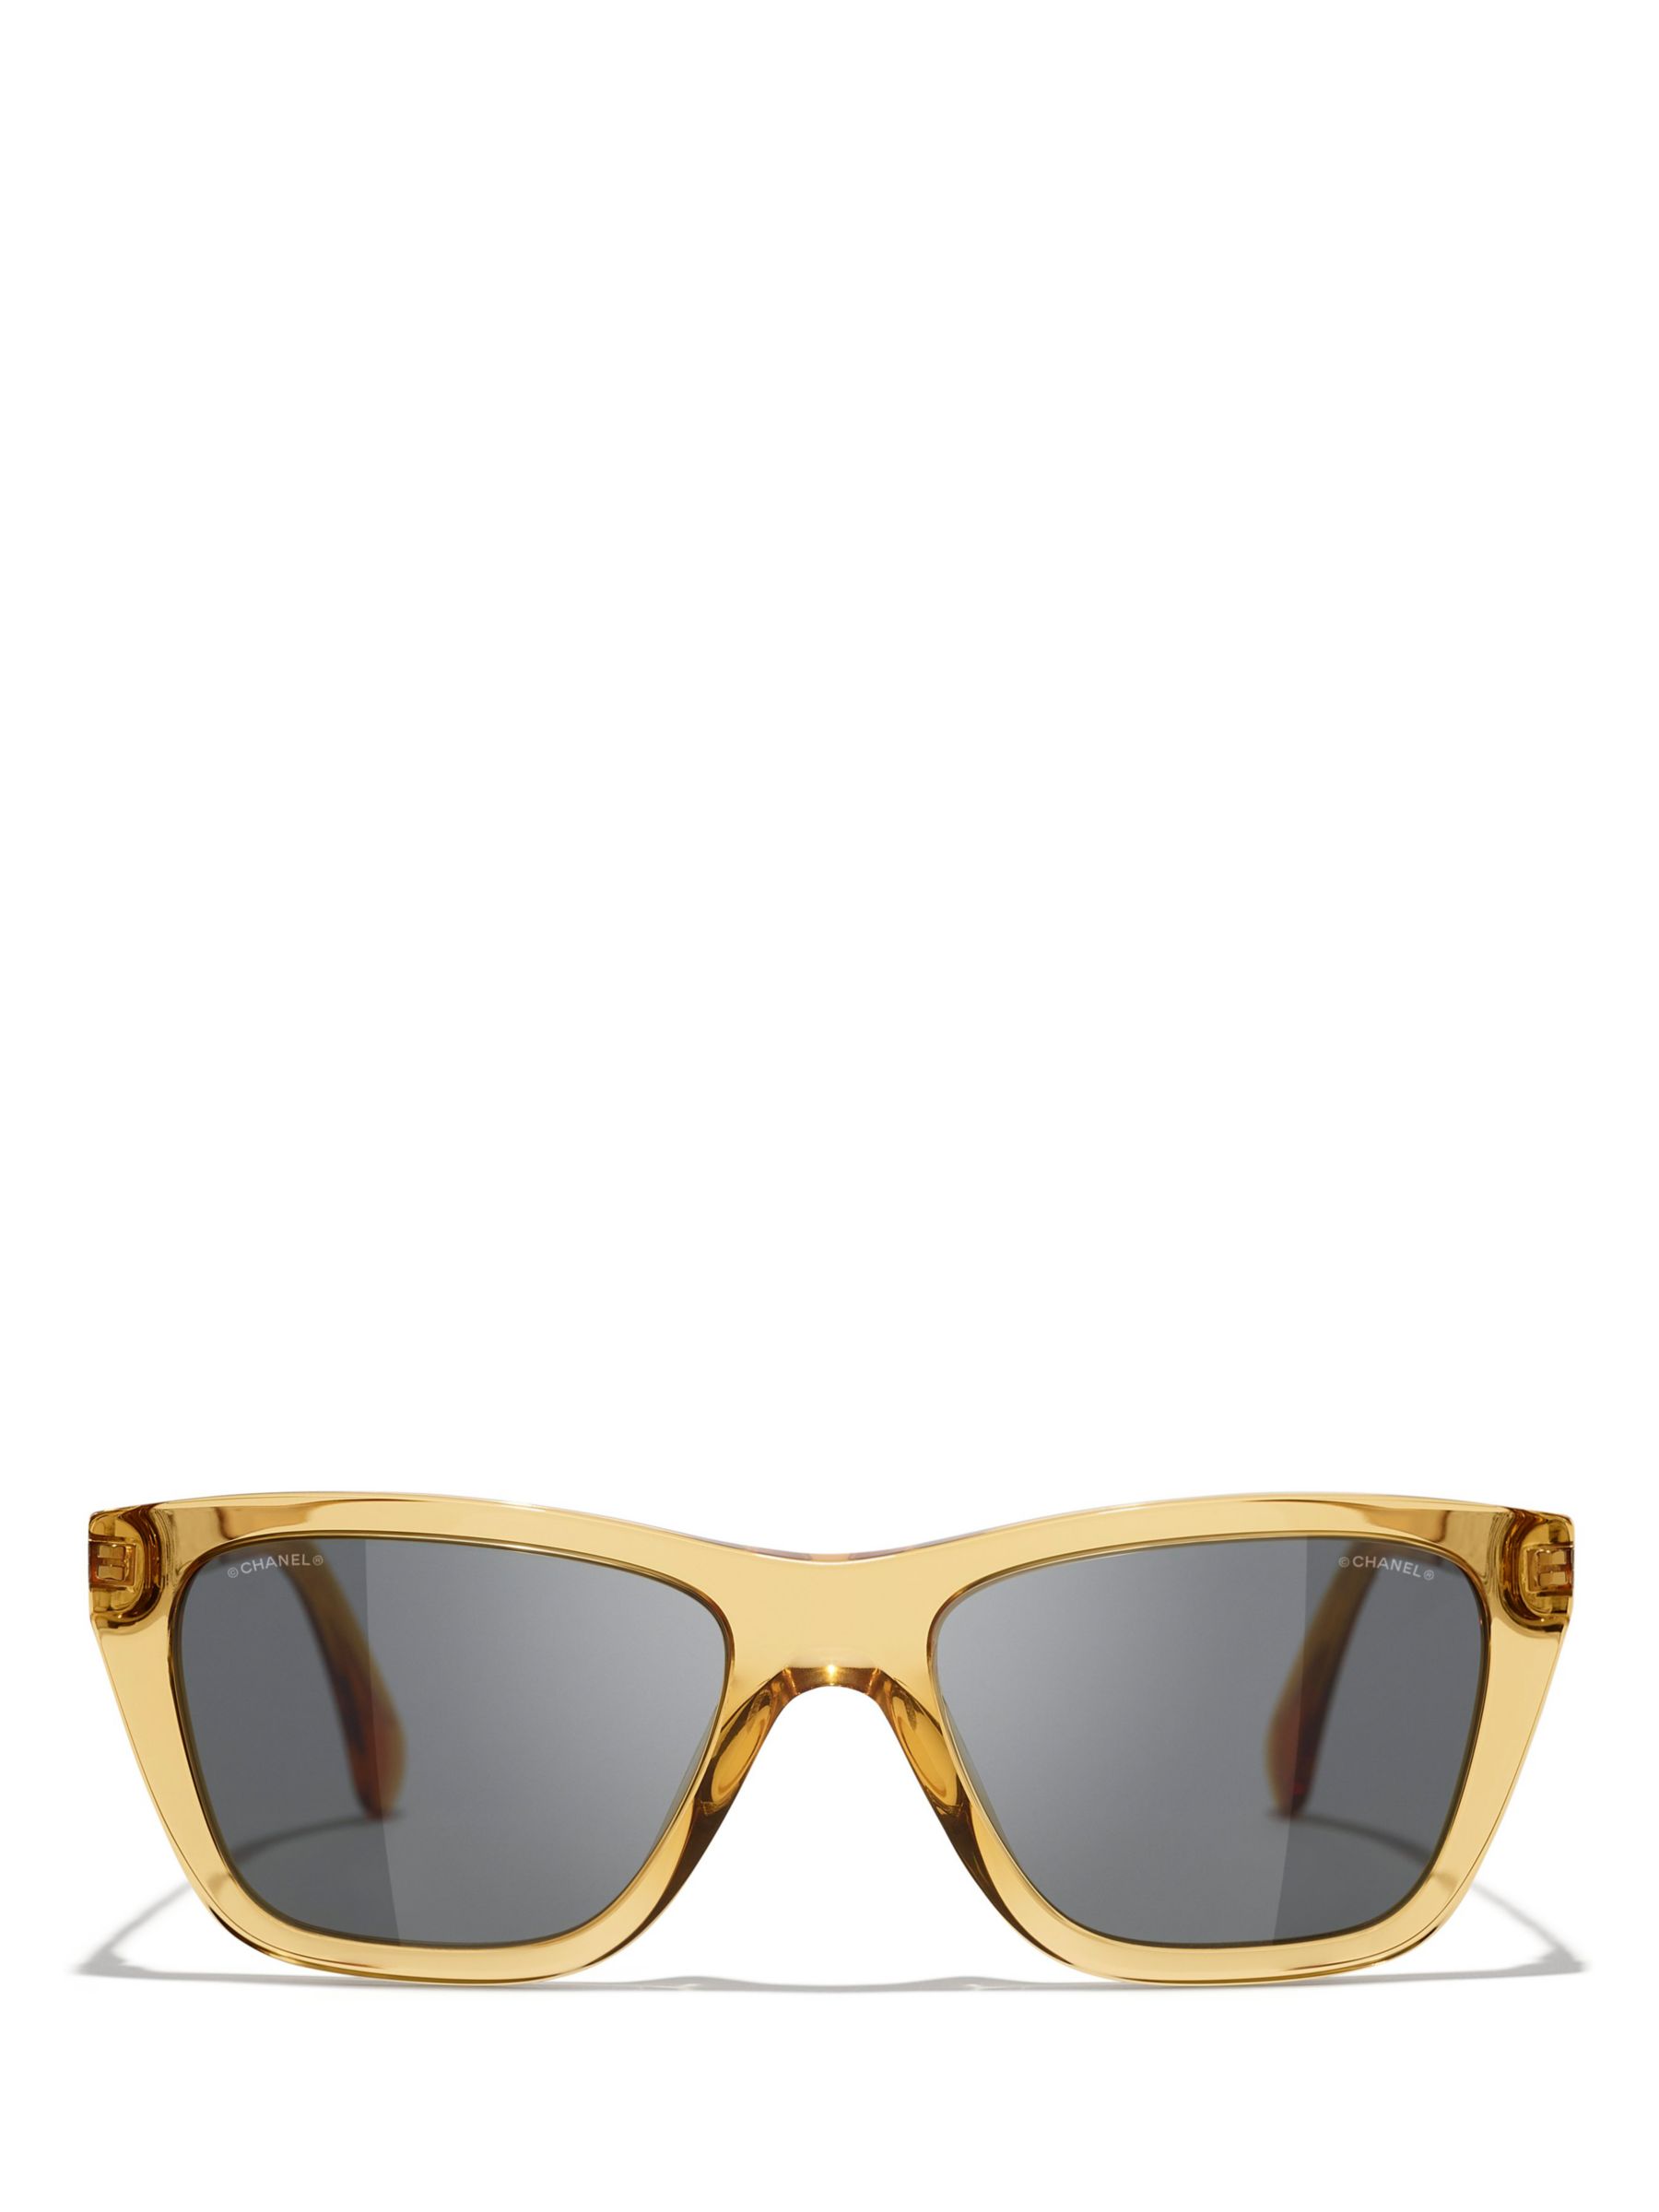 CHANEL Women's Sunglasses for Oval Face